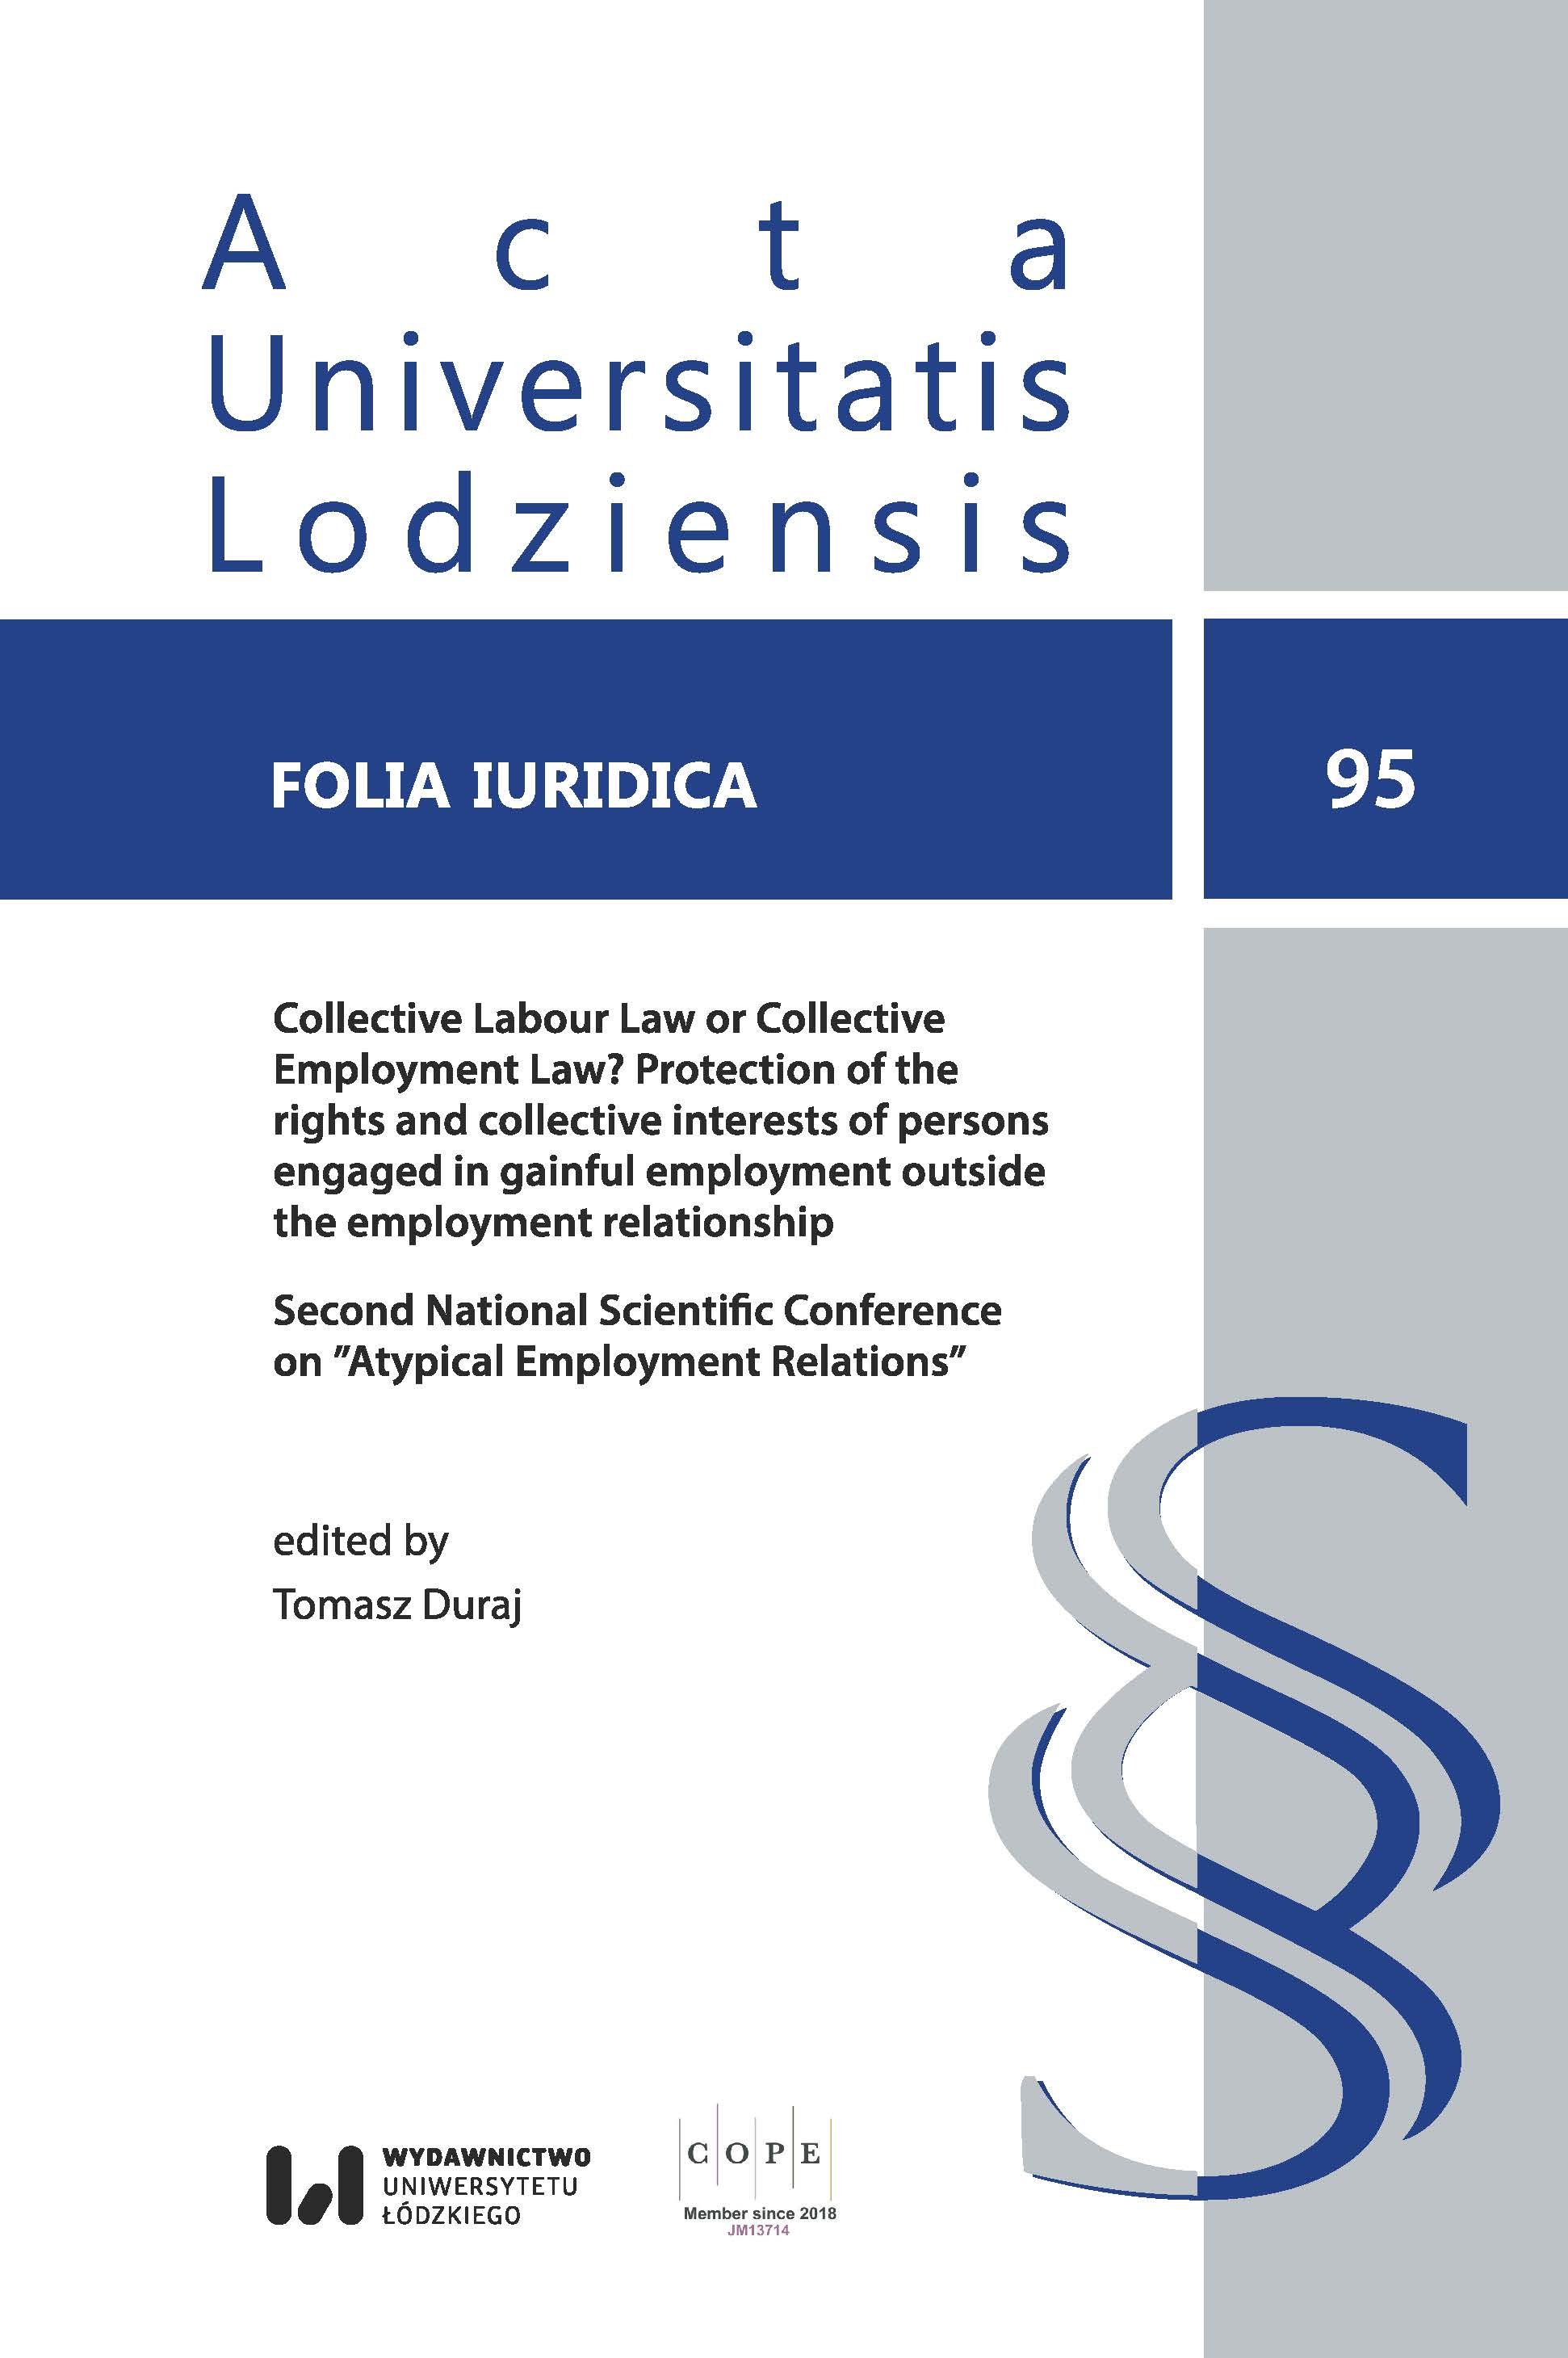 					View Vol. 95 (2021): Collective Labour Law or Collective Employment Law? Protection of the rights and collective interests of persons engaged in gainful employment outside the employment relationship. Second National Scientific Conference on ”Atypical Employment Relations”
				